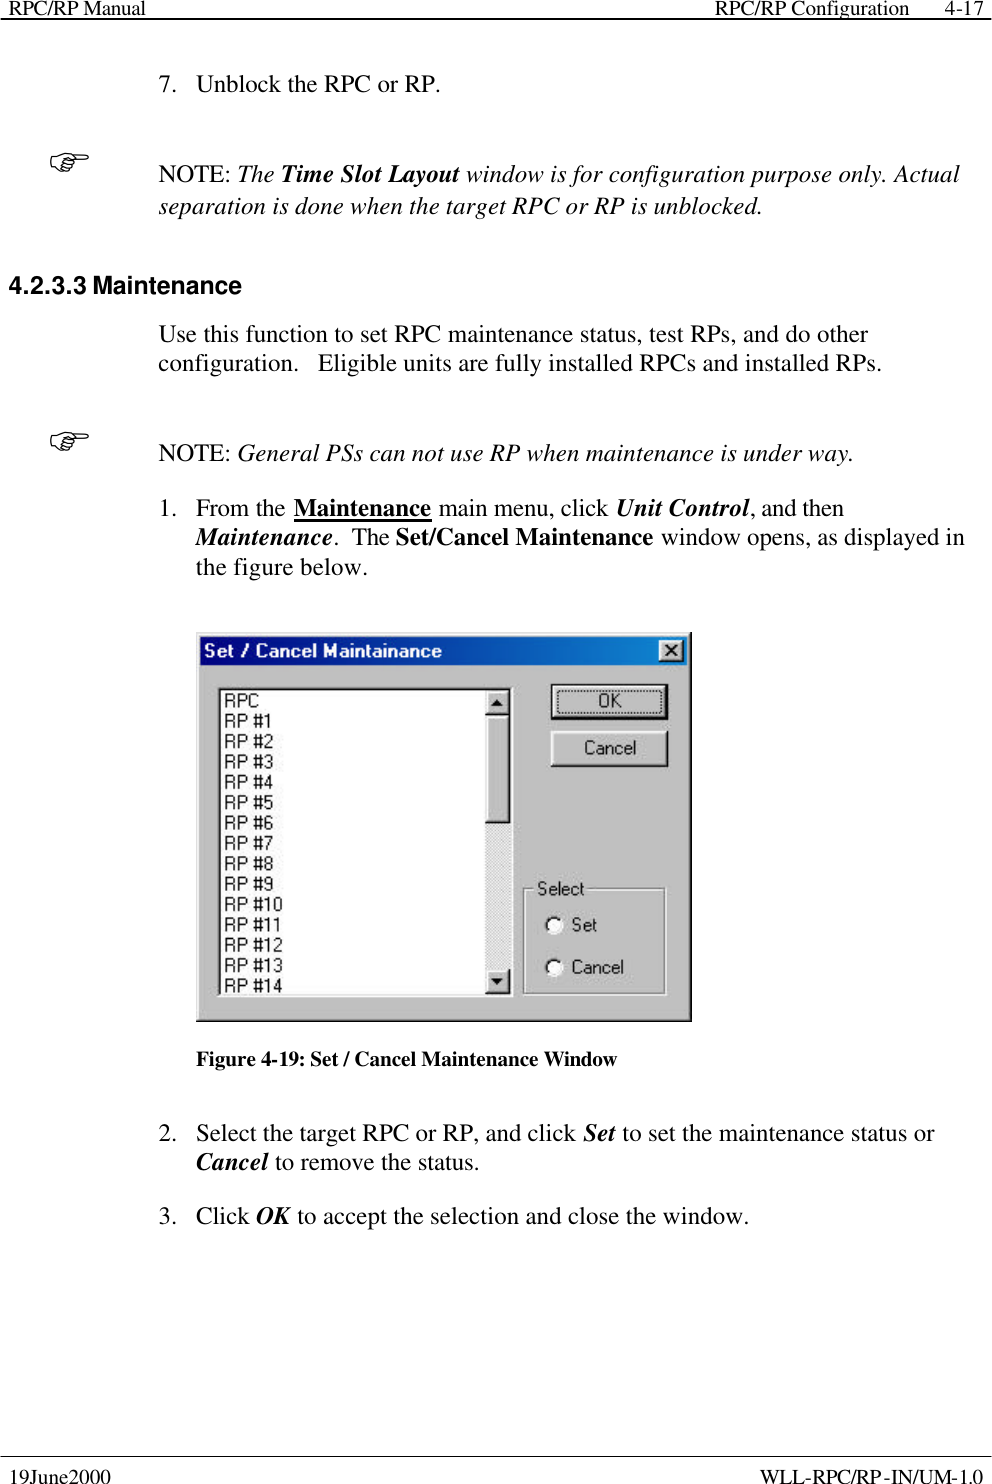 RPC/RP Manual    RPC/RP Configuration 19June2000    WLL-RPC/RP-IN/UM-1.0 4-177.  Unblock the RPC or RP. F NOTE: The Time Slot Layout window is for configuration purpose only. Actual separation is done when the target RPC or RP is unblocked. 4.2.3.3 Maintenance Use this function to set RPC maintenance status, test RPs, and do other configuration.   Eligible units are fully installed RPCs and installed RPs. F NOTE: General PSs can not use RP when maintenance is under way. 1.  From the Maintenance main menu, click Unit Control, and then Maintenance.  The Set/Cancel Maintenance window opens, as displayed in the figure below.  Figure 4-19: Set / Cancel Maintenance Window 2.  Select the target RPC or RP, and click Set to set the maintenance status or Cancel to remove the status. 3.  Click OK to accept the selection and close the window. 